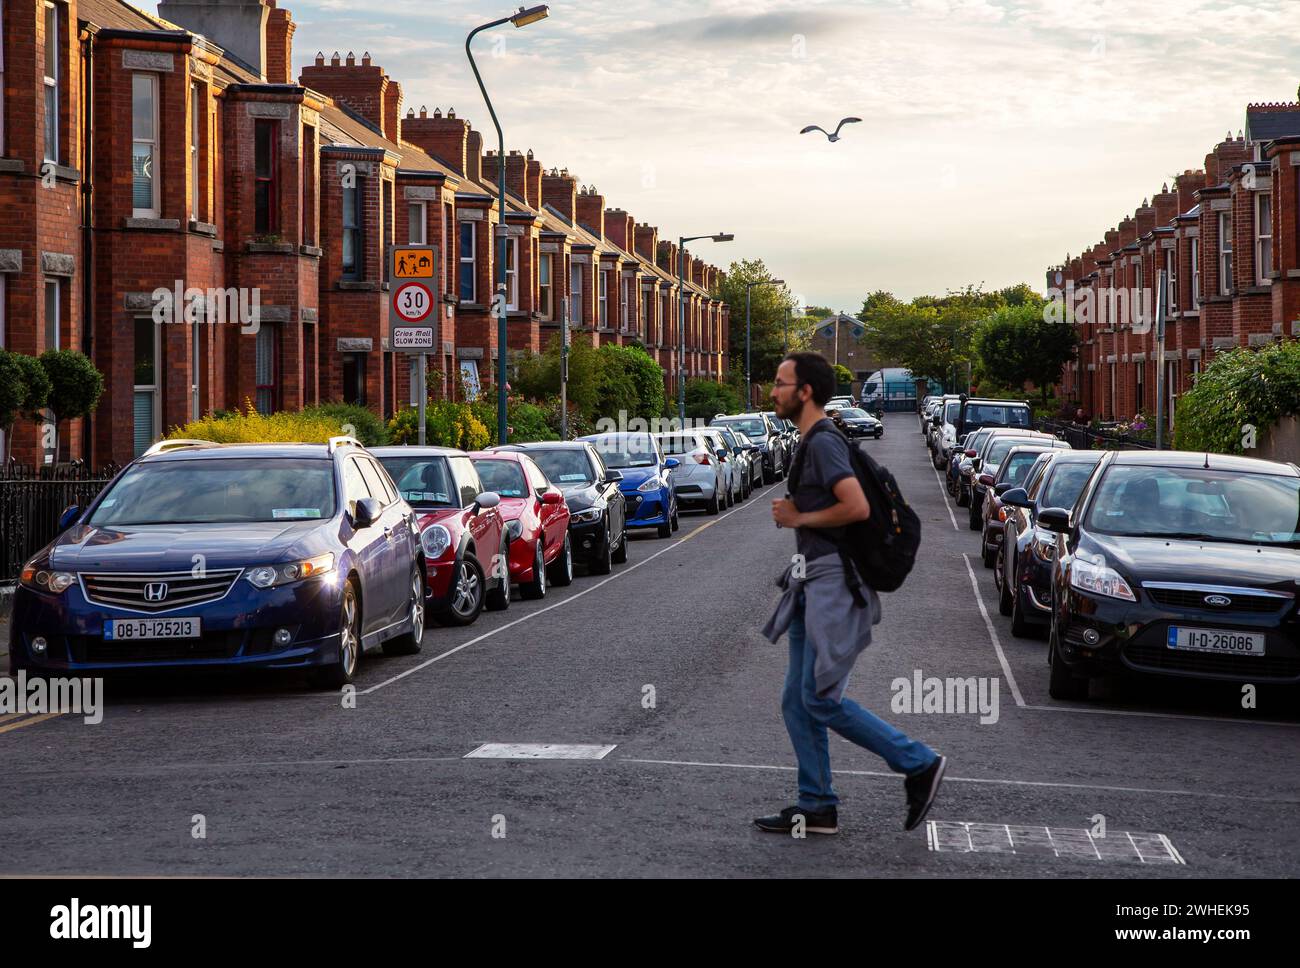 '09.07.2019, Ireland, County Dublin, Dublin - Typical, older workers' housing estate. 00A190709D276CAROEX.JPG [MODEL RELEASE: NO, PROPERTY RELEASE: NO Stock Photo